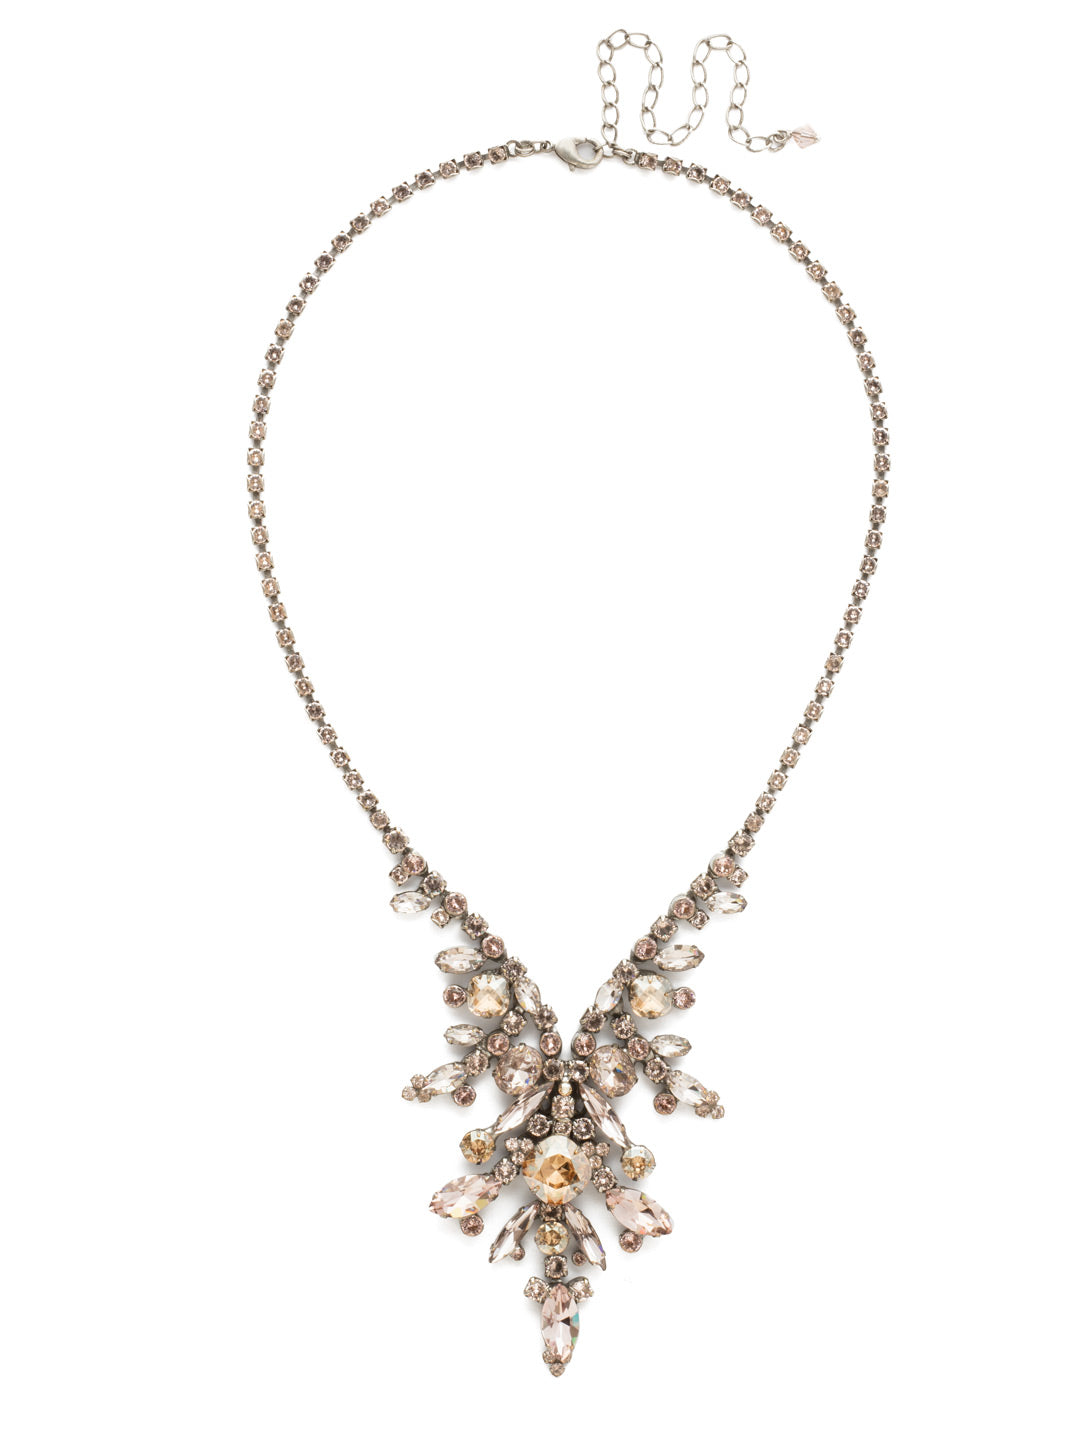 Aubretia Necklace - NDT16ASSBL - <p>Navette and round crystals radiate from a central cushion cut stone in this statement style. From Sorrelli's Satin Blush collection in our Antique Silver-tone finish.</p>